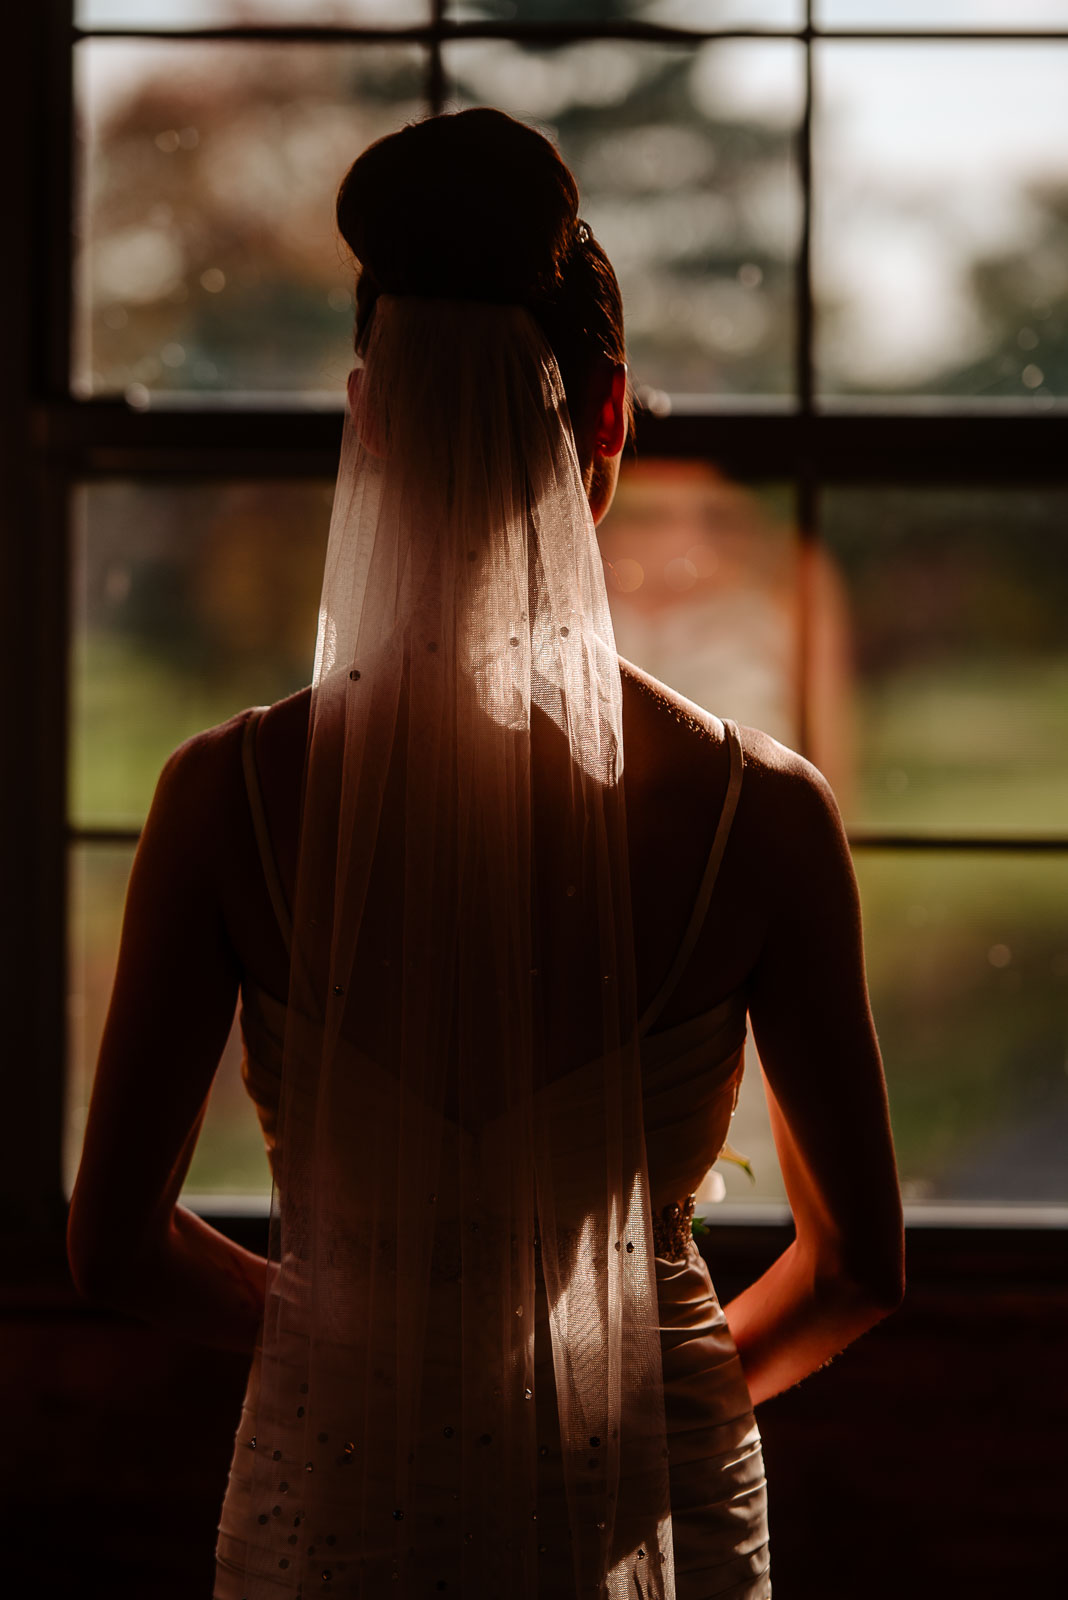 Bride looks out the window